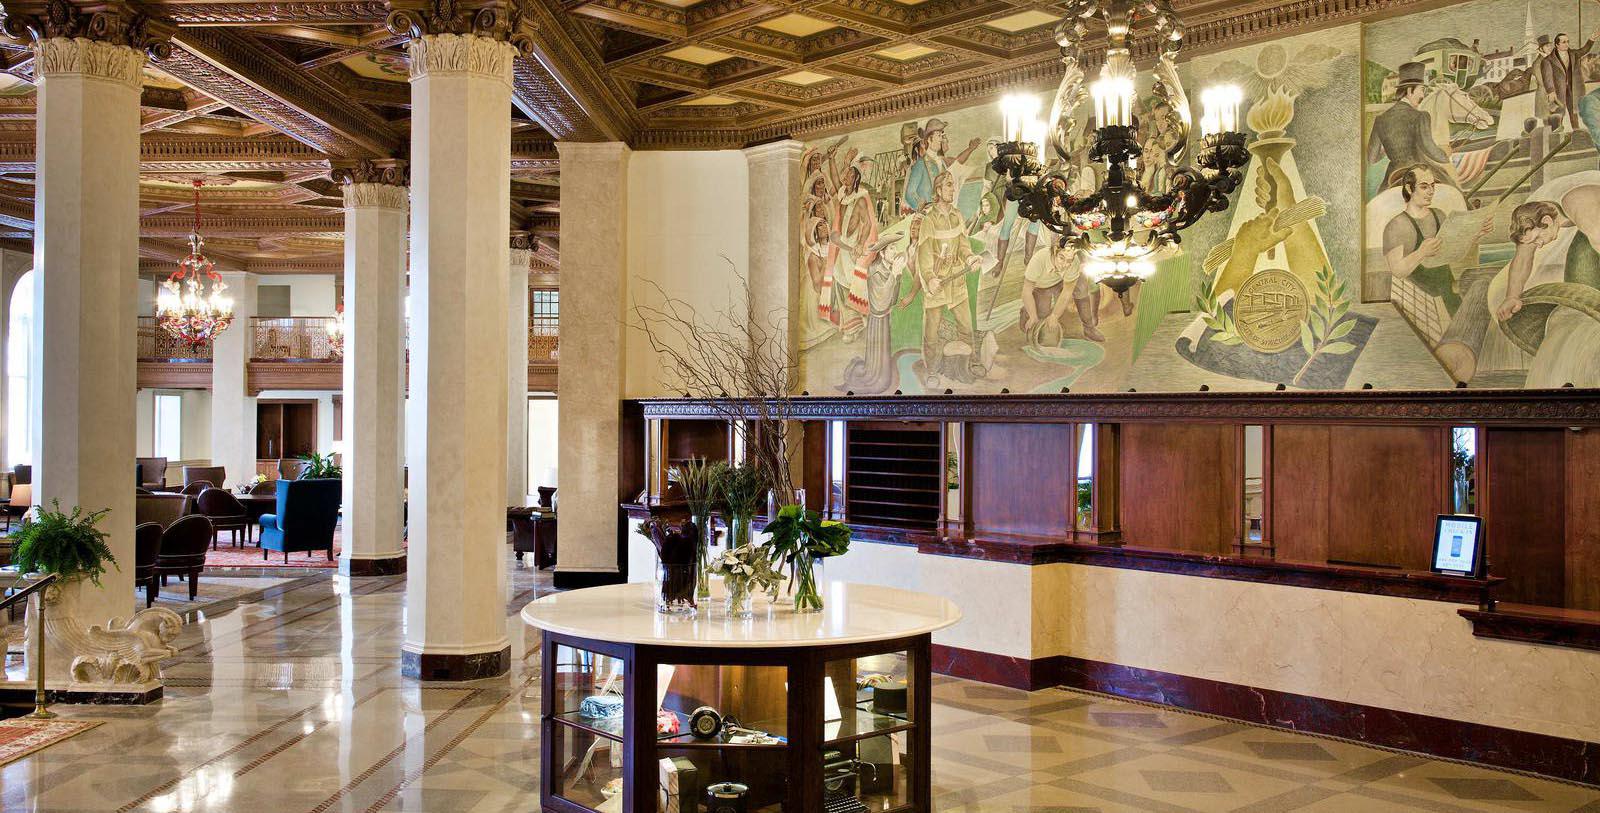 Image of Lobby, Marriott Syracuse Downtown, Syracuse, New York, 1924, Member of Historic Hotels of America, Discover